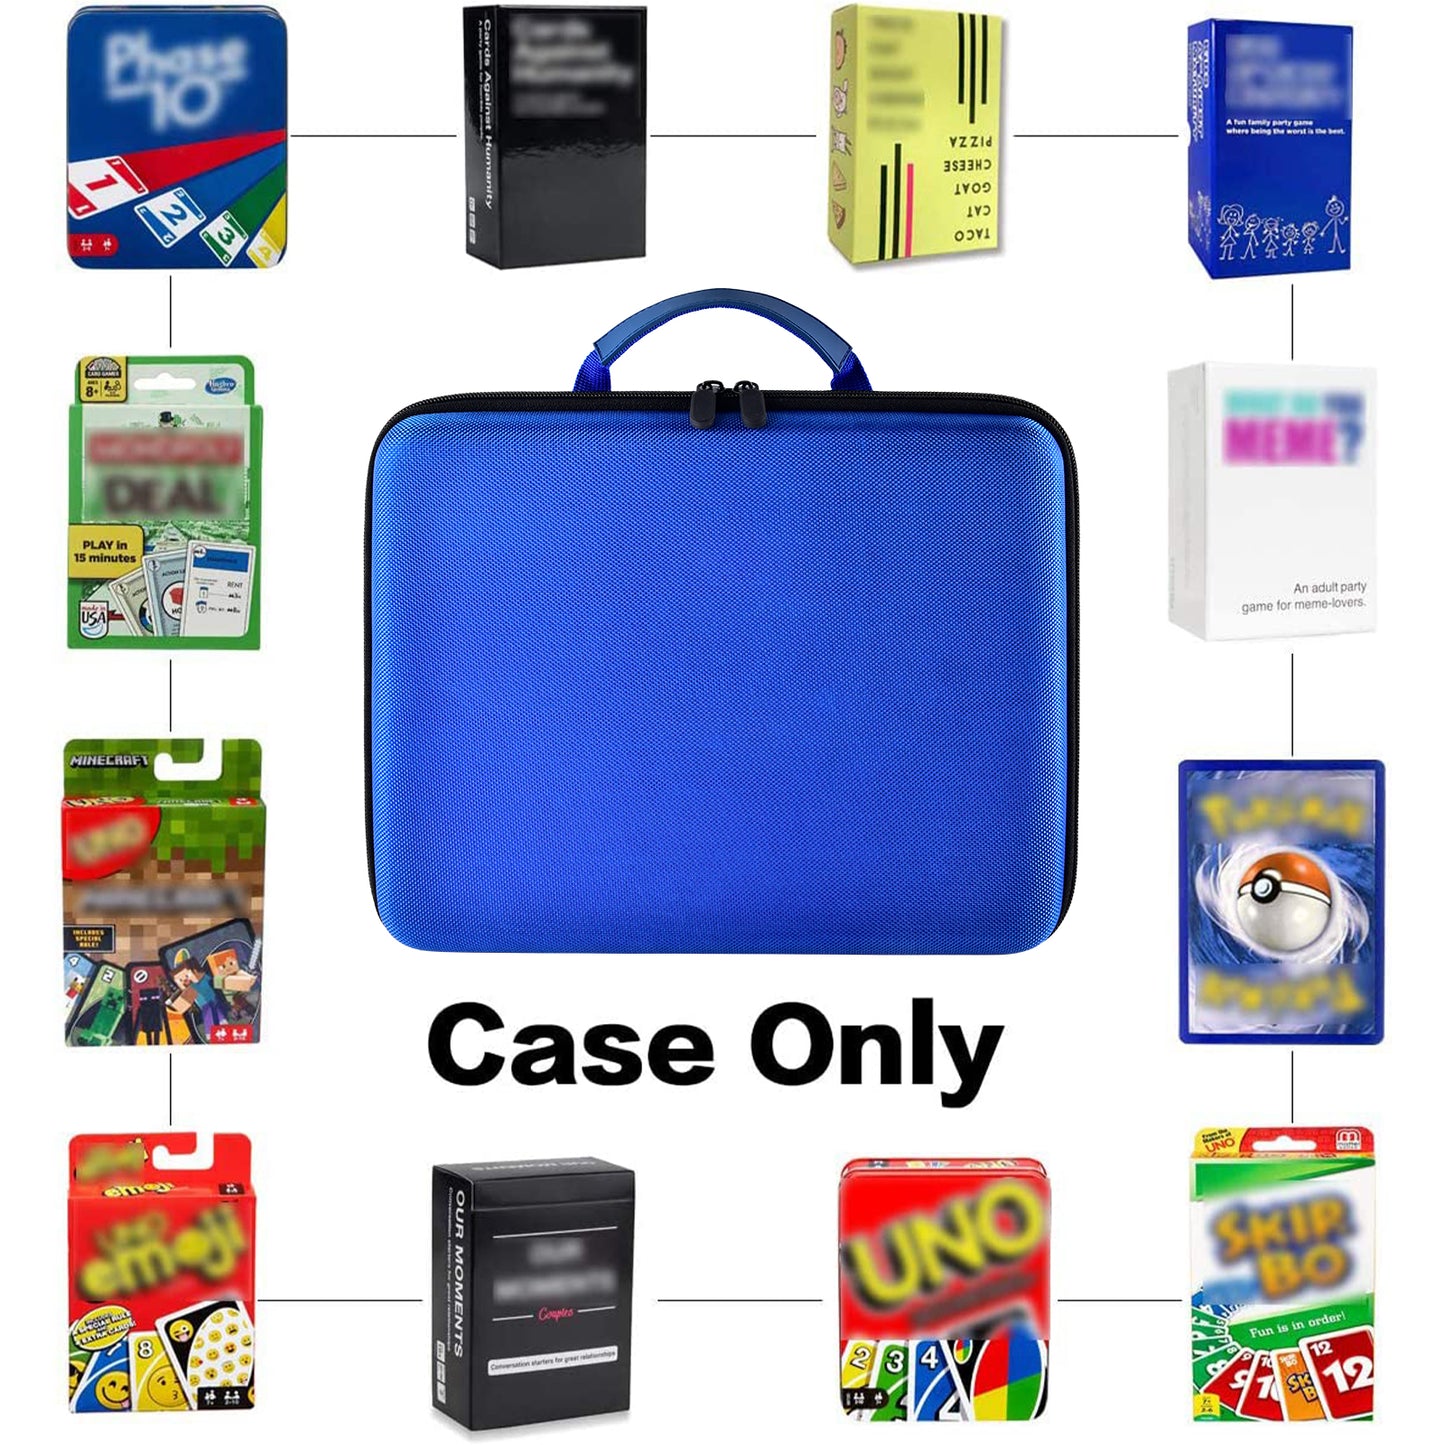 Extra Large Game Card Case Storage Holder for 2500+ Cards, Fits for Main Card Game - C. A. H. Card Game, Sport Card Box for PM Cards, and All Other Card Games Expansions-Bag Only